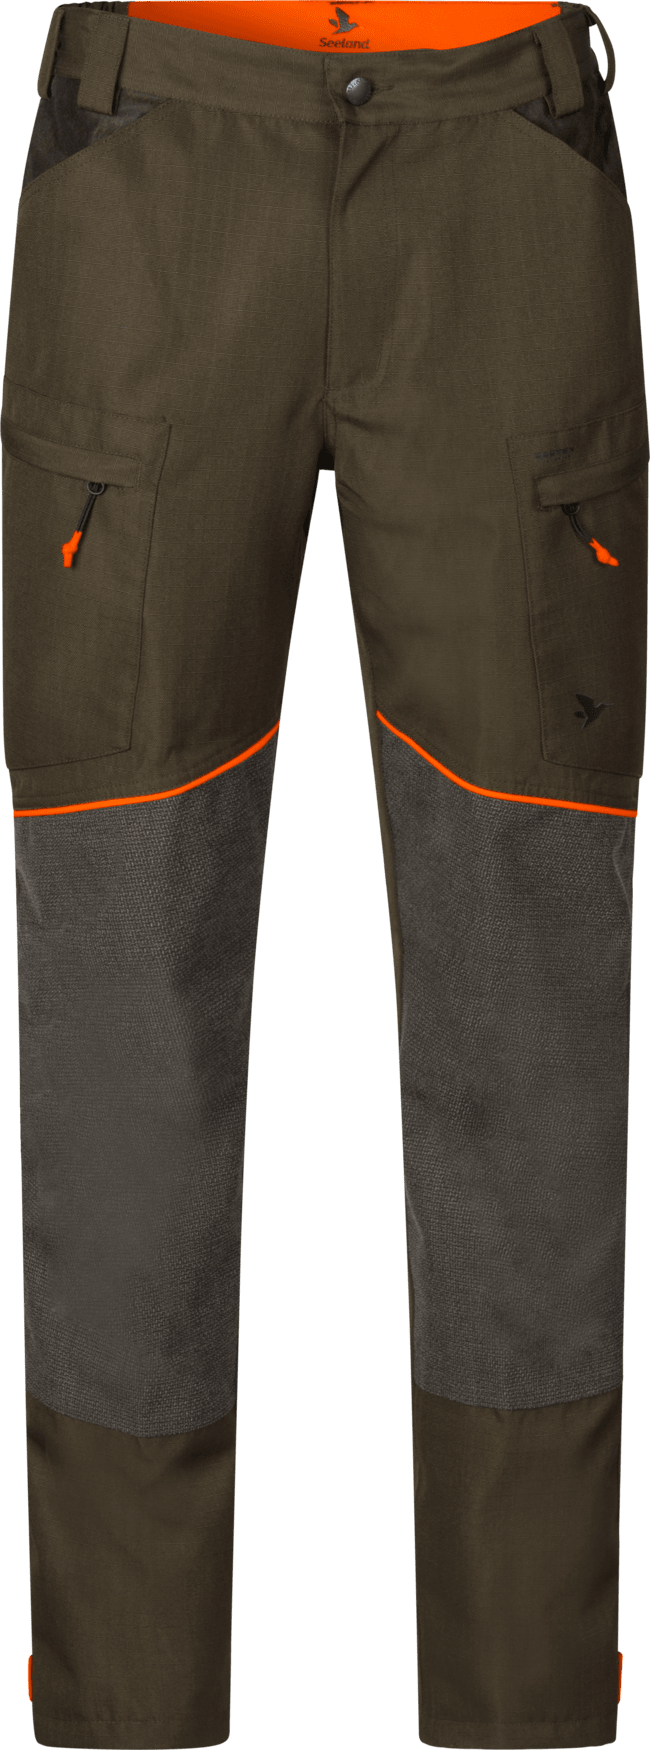 Buy Seeland Men's Venture Pants from Outnorth